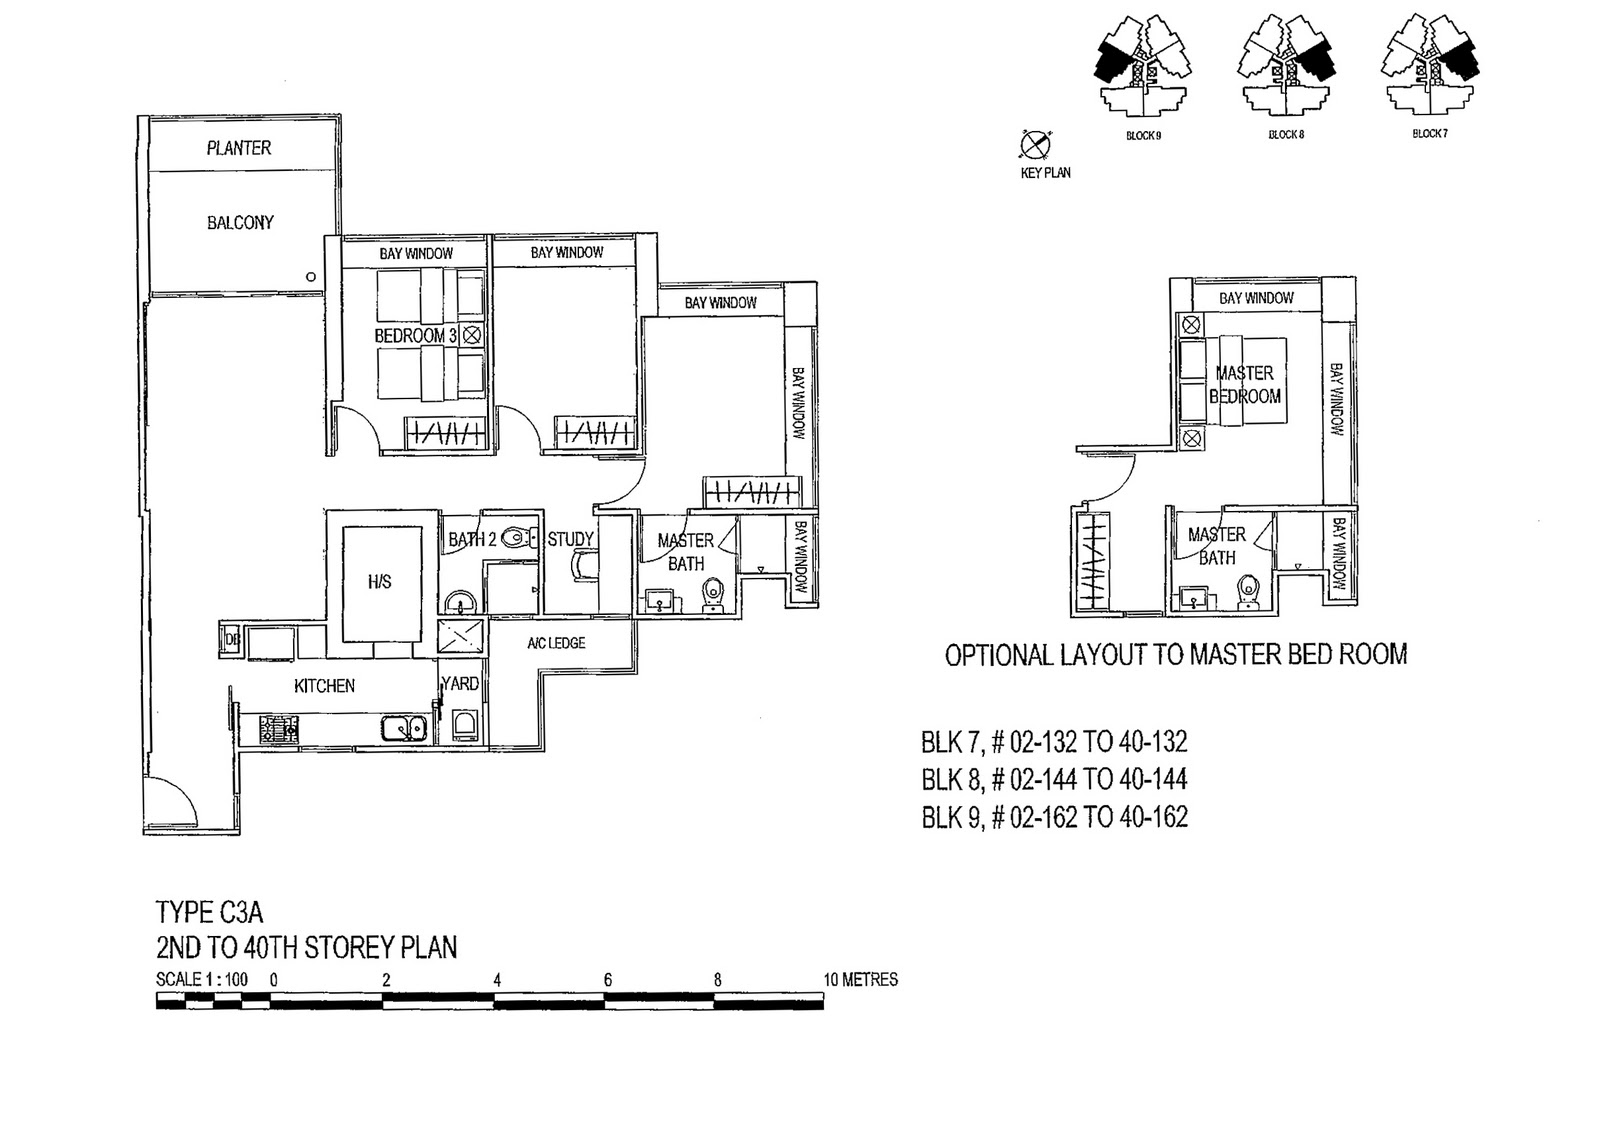 3rd Floor plan which include measurement receive from Hoi Hup when key ...